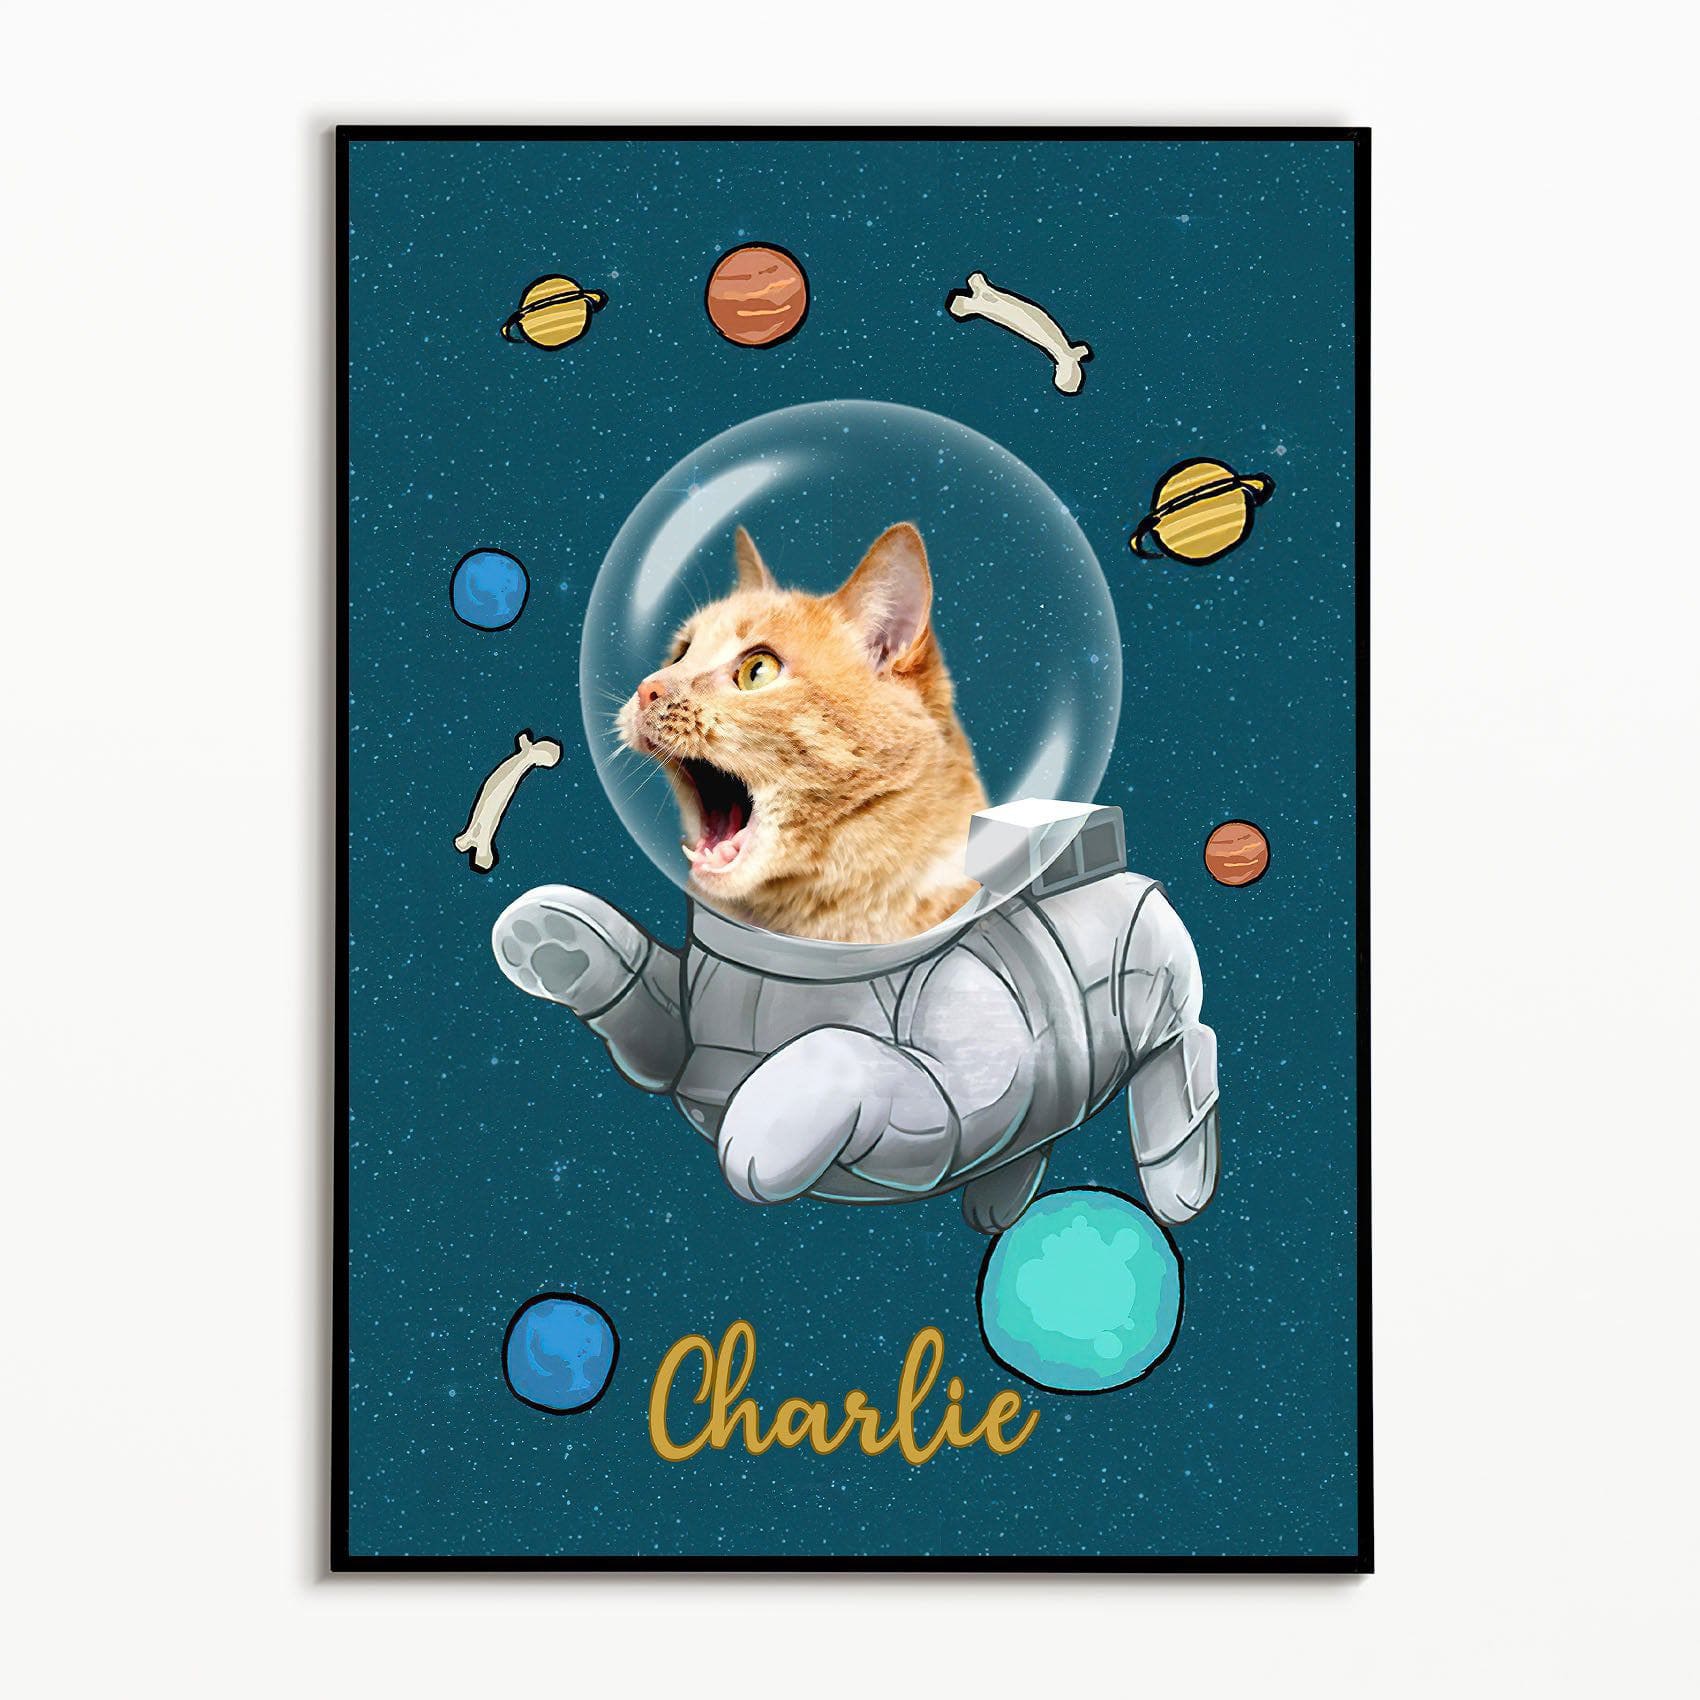 USA MADE Cat Astronaut Galaxy Personalized Pet Poster Canvas Print | Personalized Dog Cat Prints | Magazine Covers | Custom Pet Portrait from Photo | Personalized Gifts for Cat Mom or Dad, Pet Memorial Gift